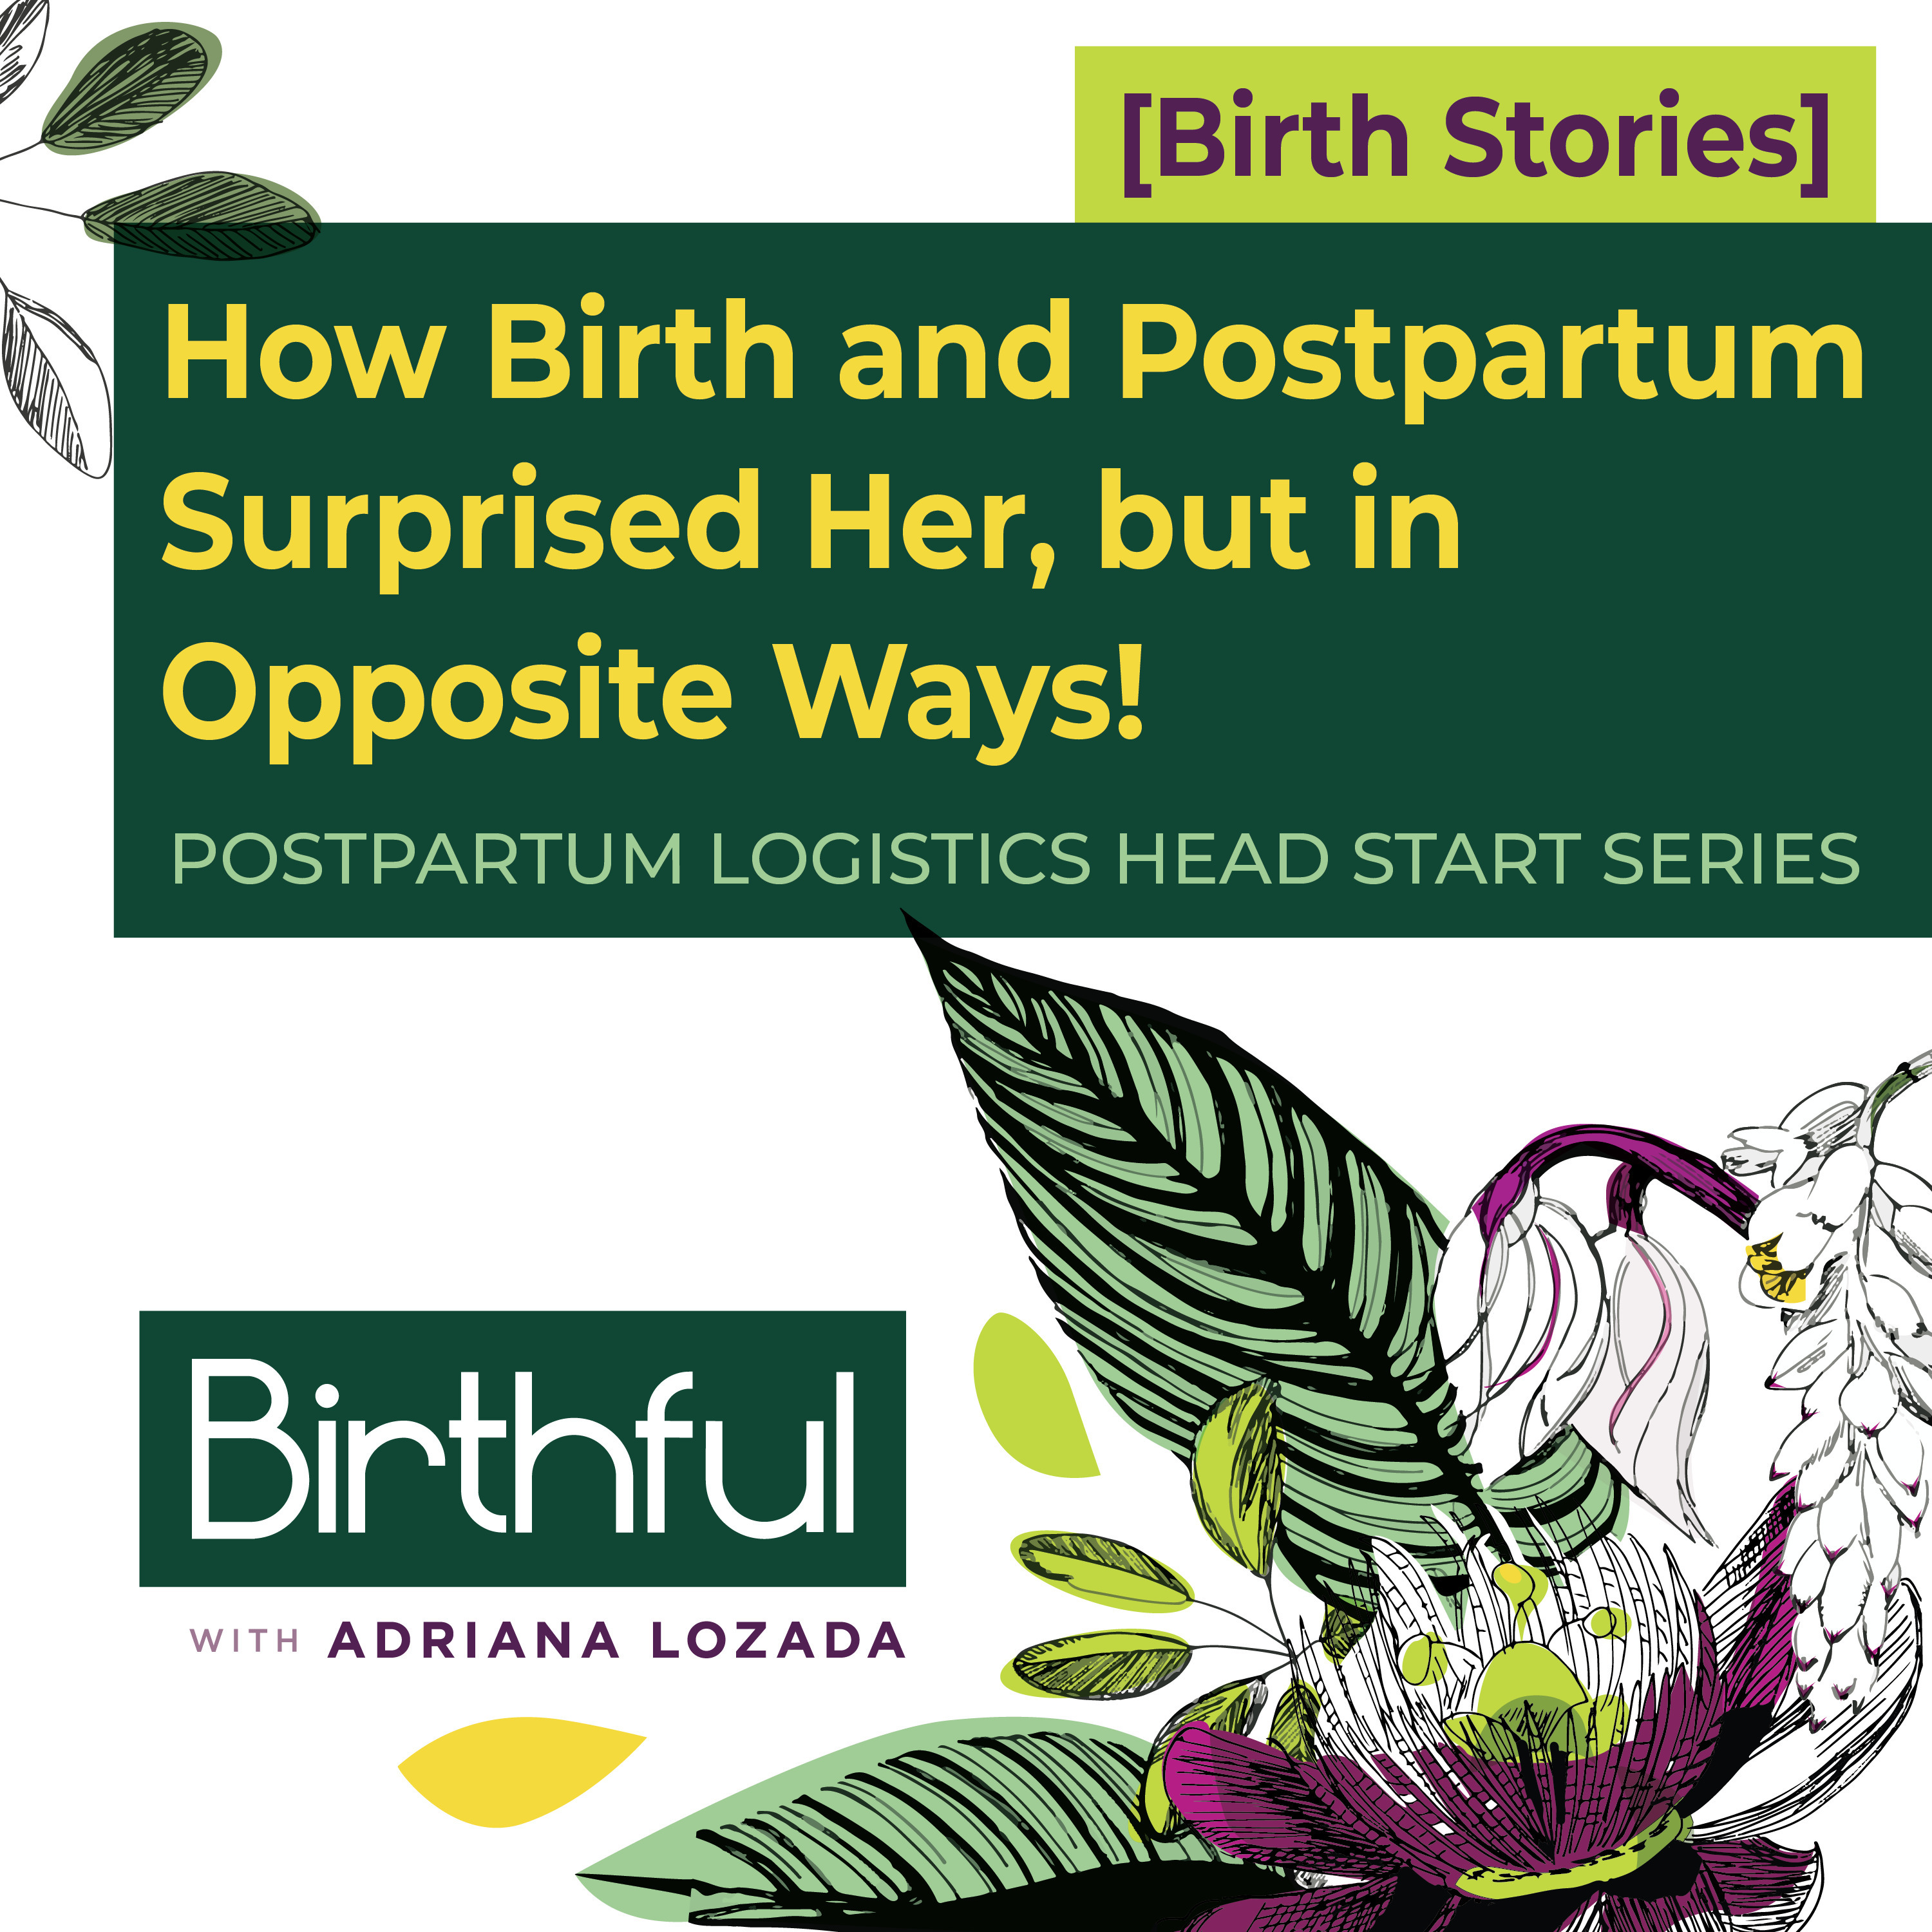 [Birth Stories] How Birth and Postpartum Surprised Her, but in Opposite Ways!